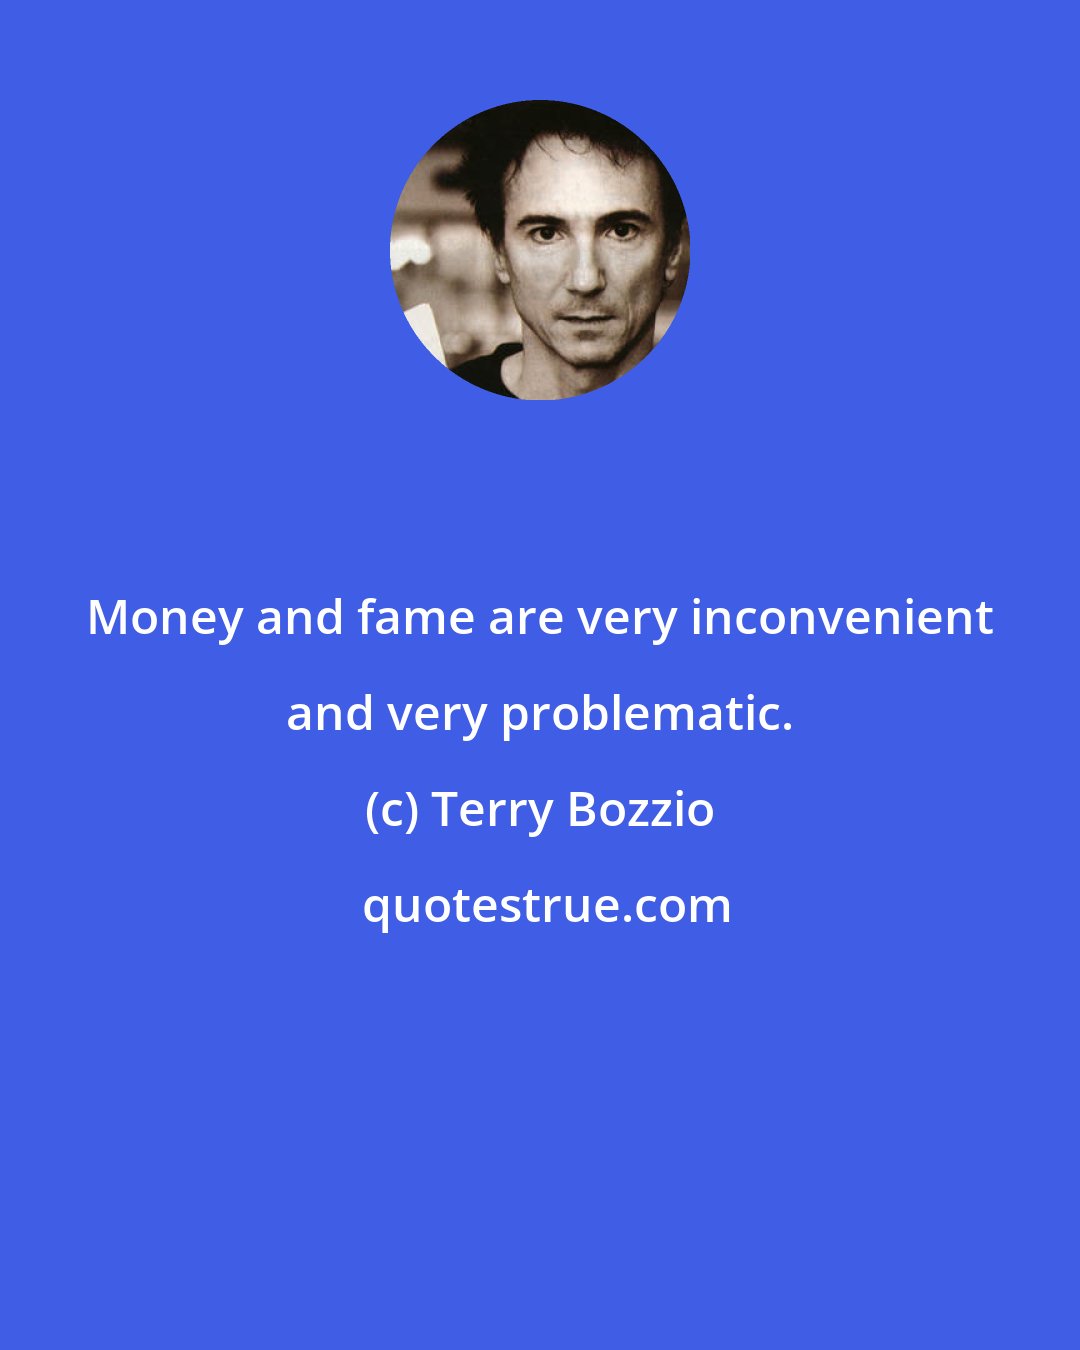 Terry Bozzio: Money and fame are very inconvenient and very problematic.